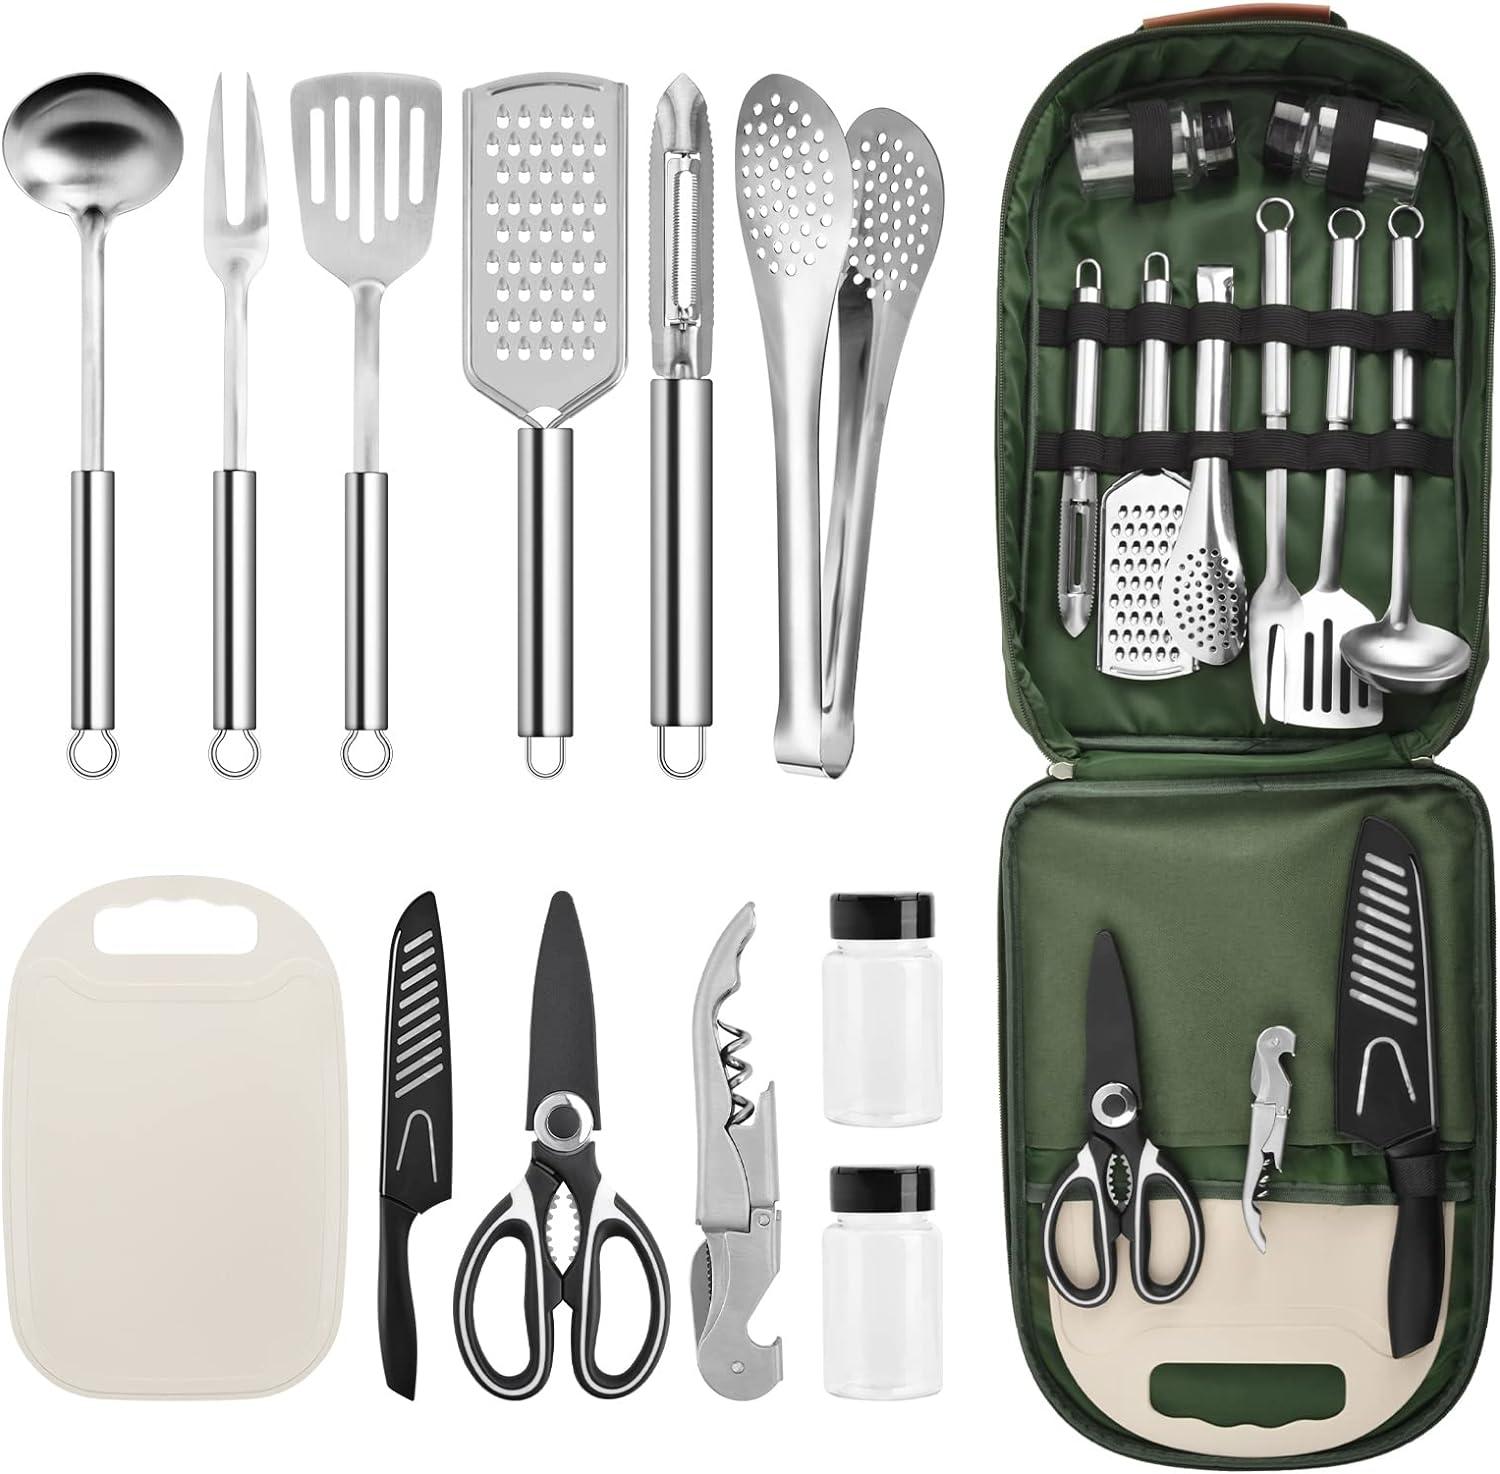 Portable Camping Kitchen Utensil Set-27 Piece Cookware Kit, Stainless Steel  Outdoor Cooking and Grilling Utensil Organizer Travel Set Perfect for Travel,  Picnics, RVs, Camping, BBQs, Parties and More 